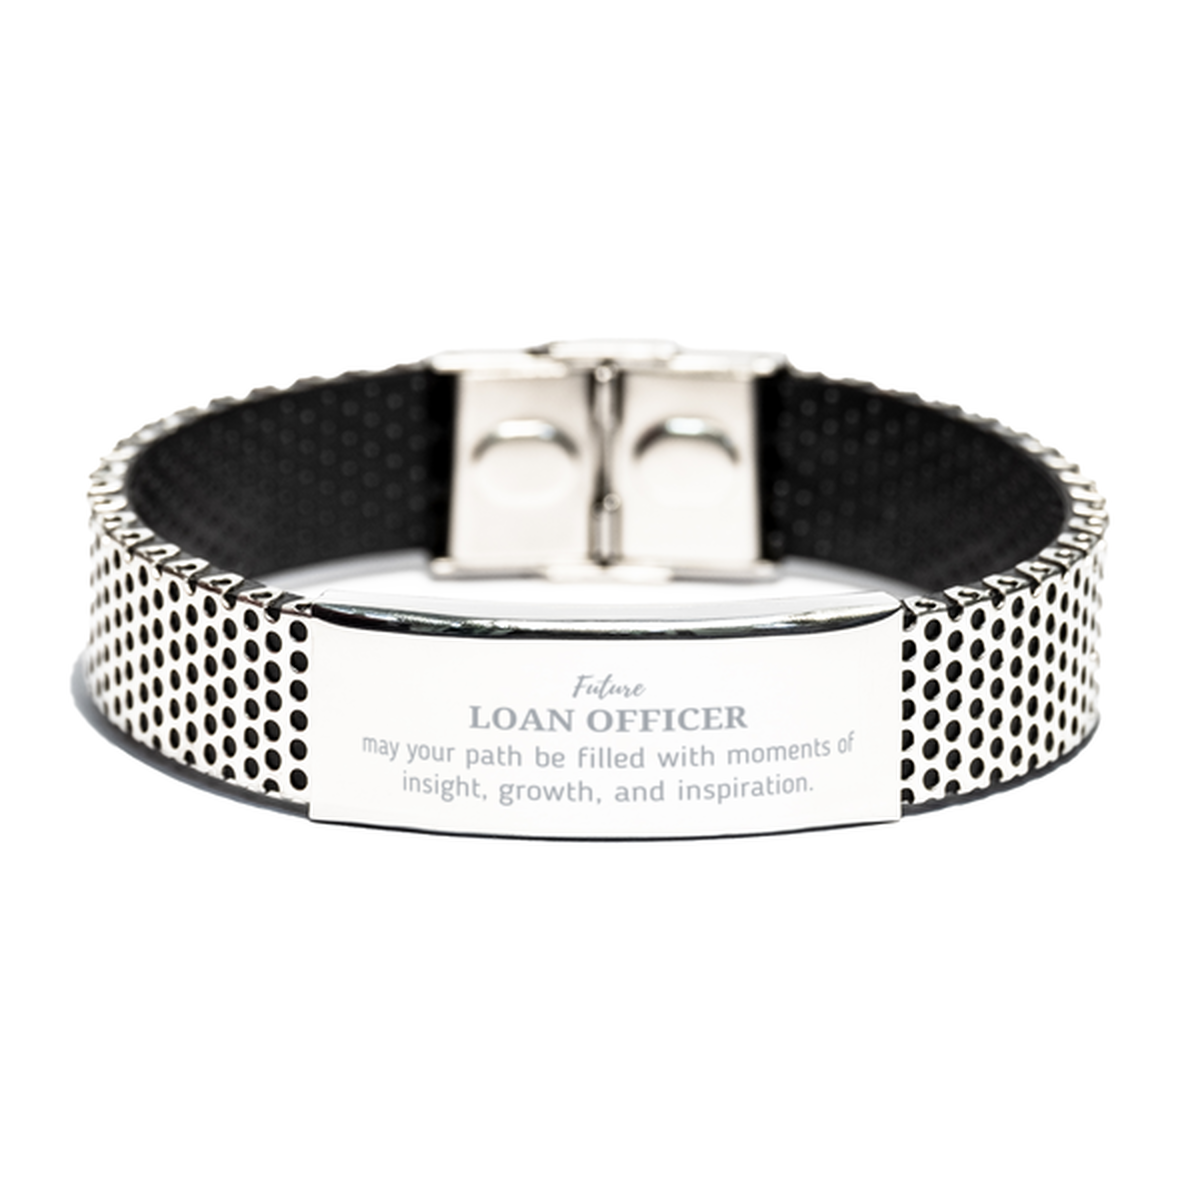 Future Loan Officer Gifts, May your path be filled with moments of insight, Graduation Gifts for New Loan Officer, Christmas Unique Stainless Steel Bracelet For Men, Women, Friends